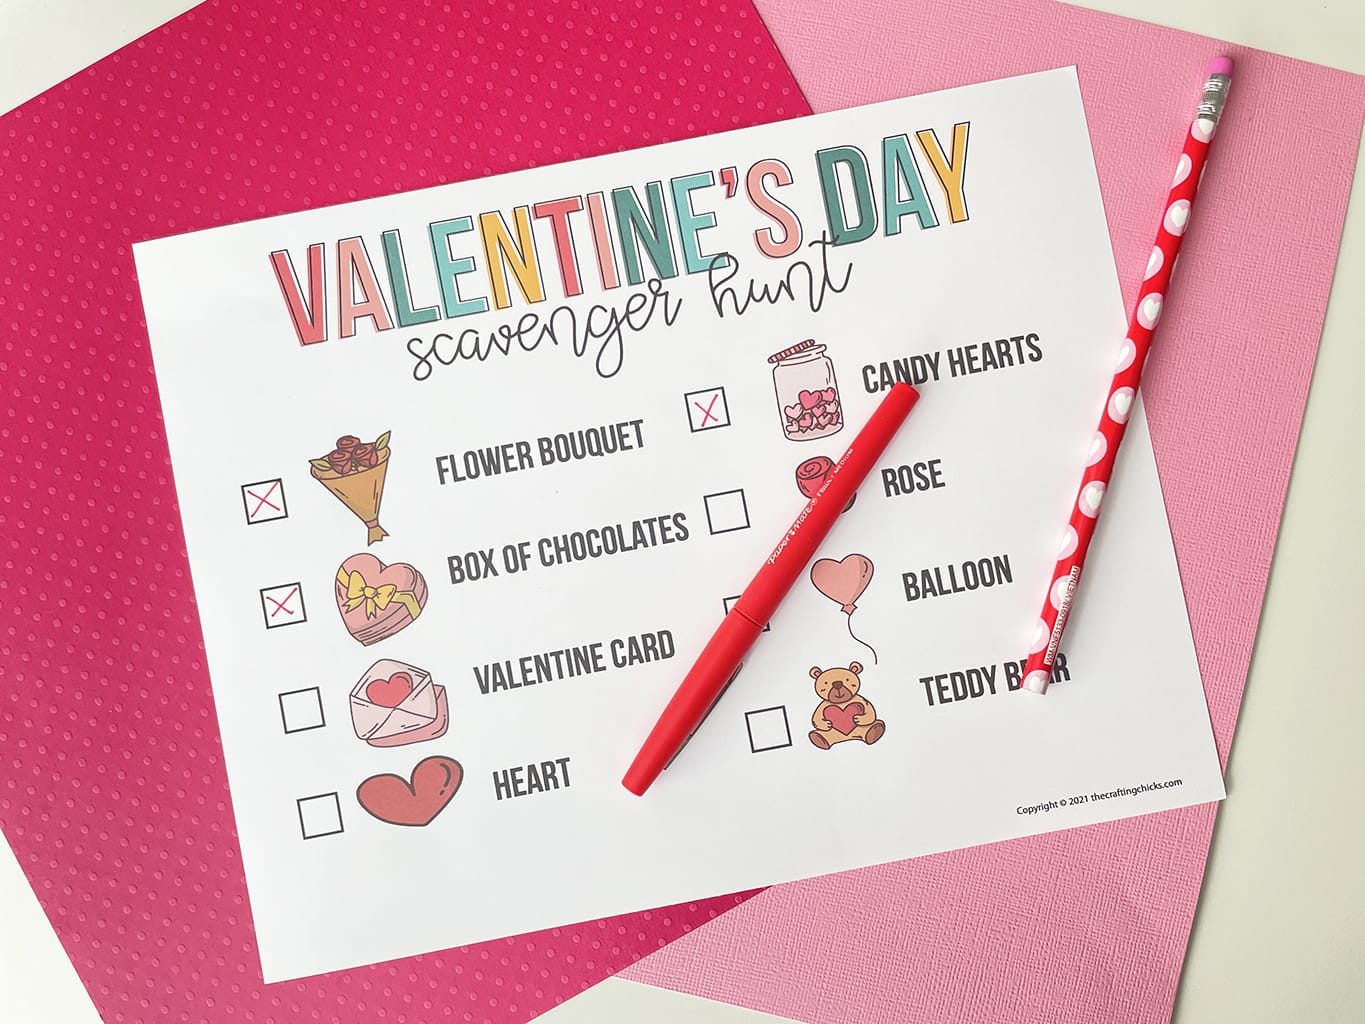 Printable of the Valentine's Day Scavenger Hunt printed out and placed on a white table, with dark pink and light pink paper behind it. Red fine line marker has crossed off some of the boxes.